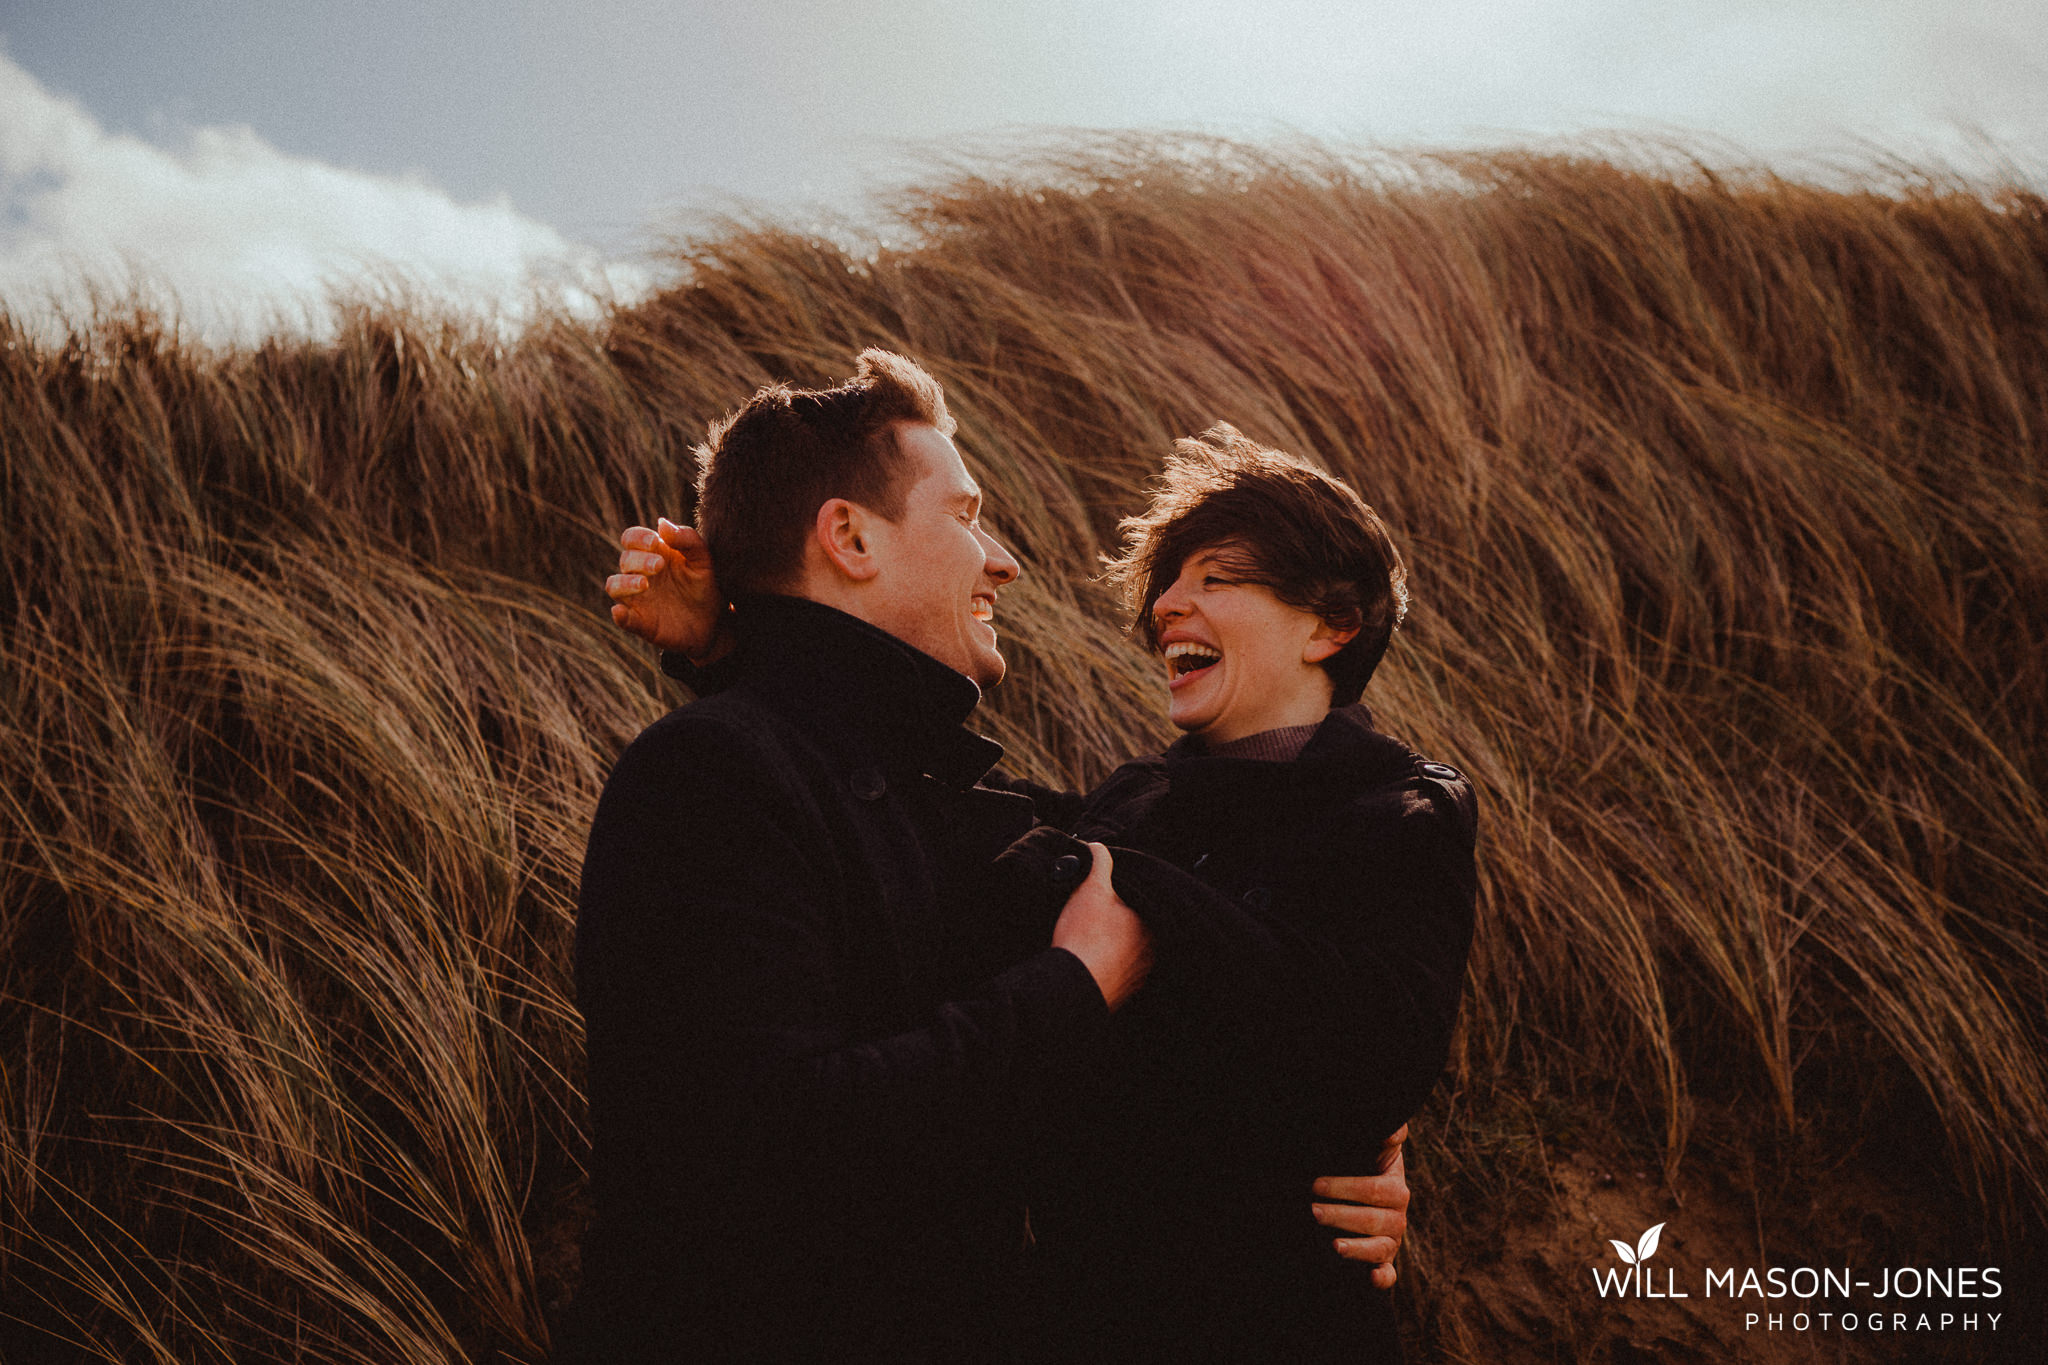  three cliffs bay swansea pre wedding couple photography earthy colourful relaxed photographer 